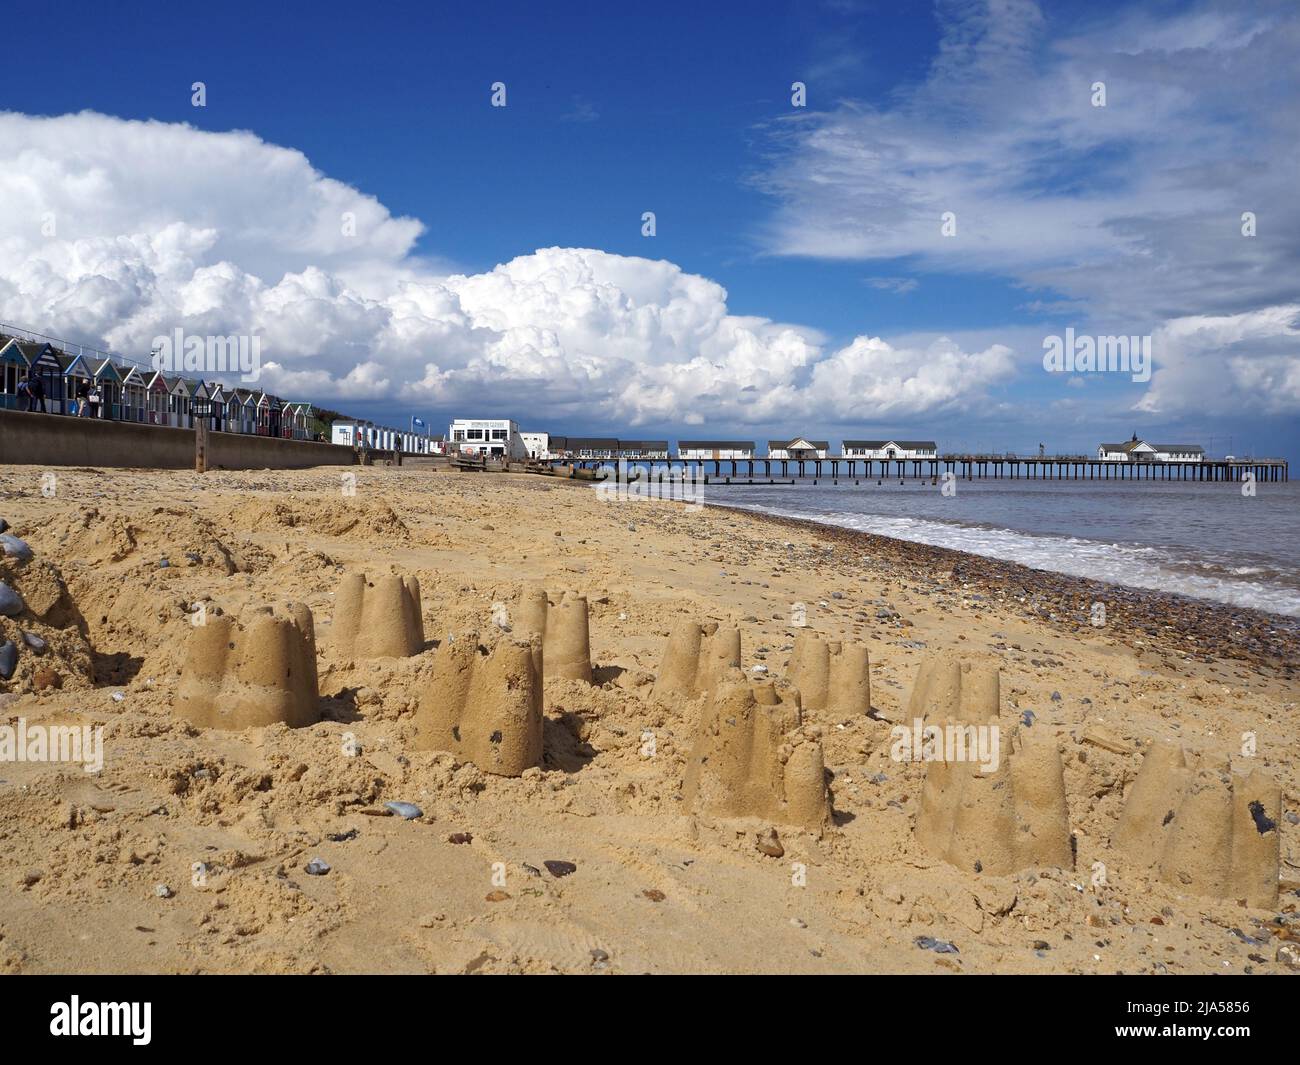 Sandcastles on the beach at Southwold, a seaside town in Suffolk. Stock Photo